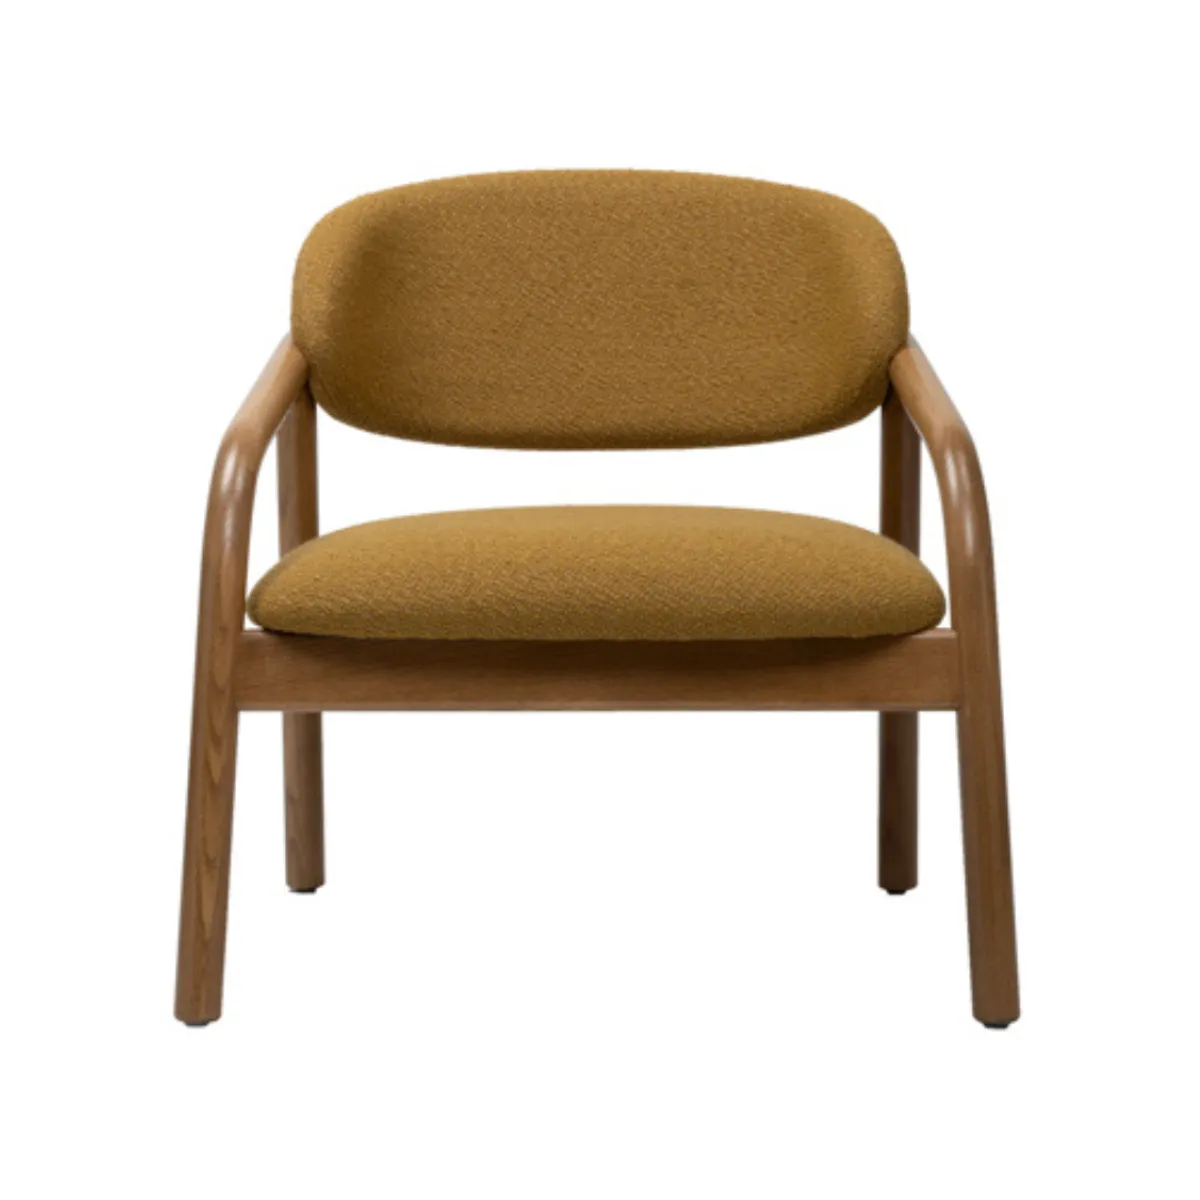 Adeline lounge chair 3